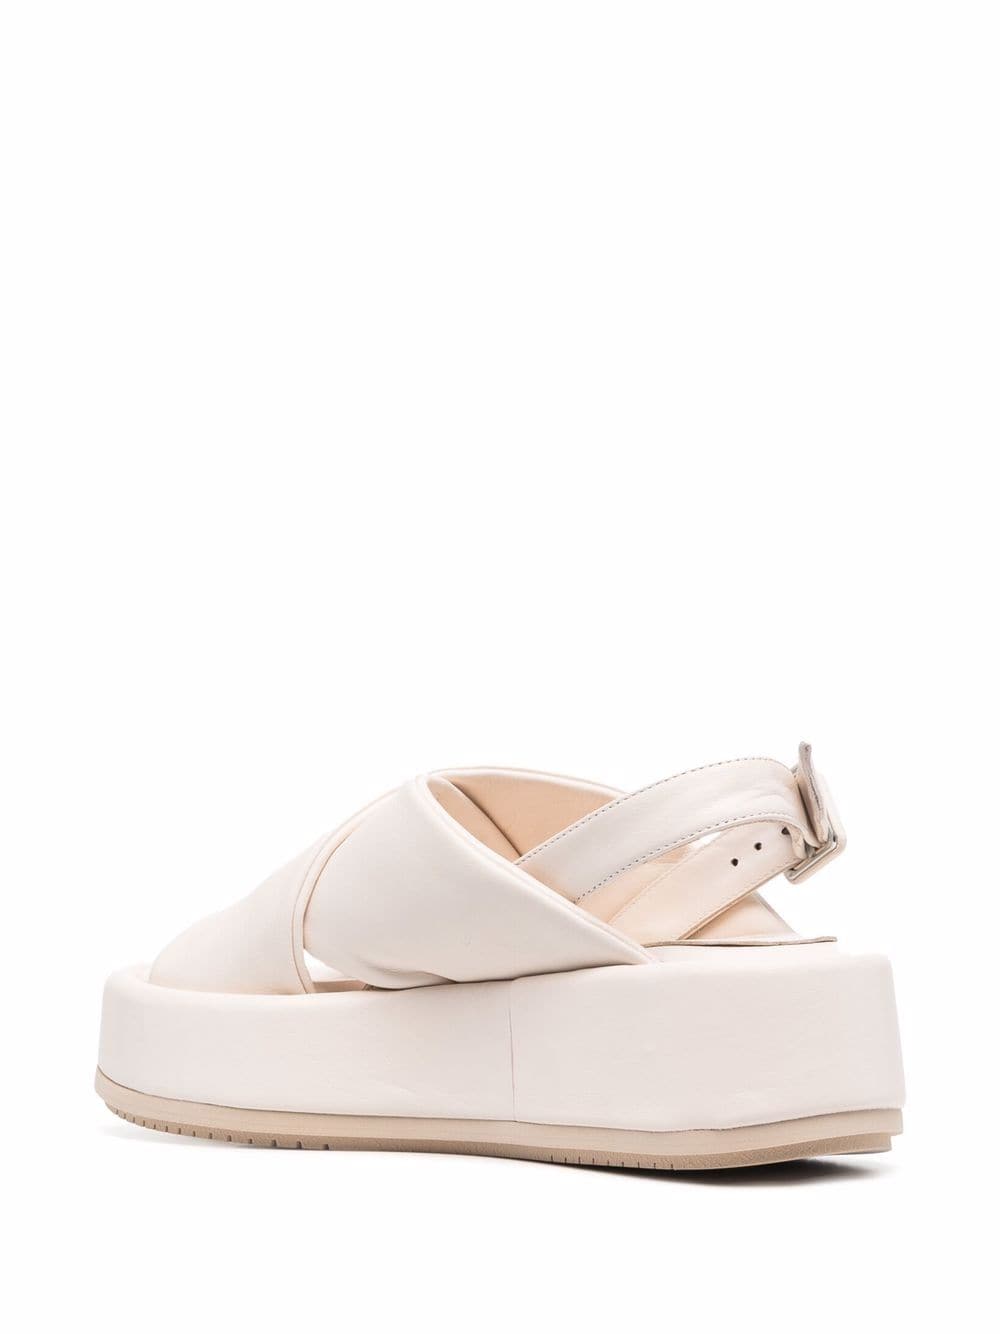 Paloma Barceló crossover-strap Leather Sandals - Farfetch